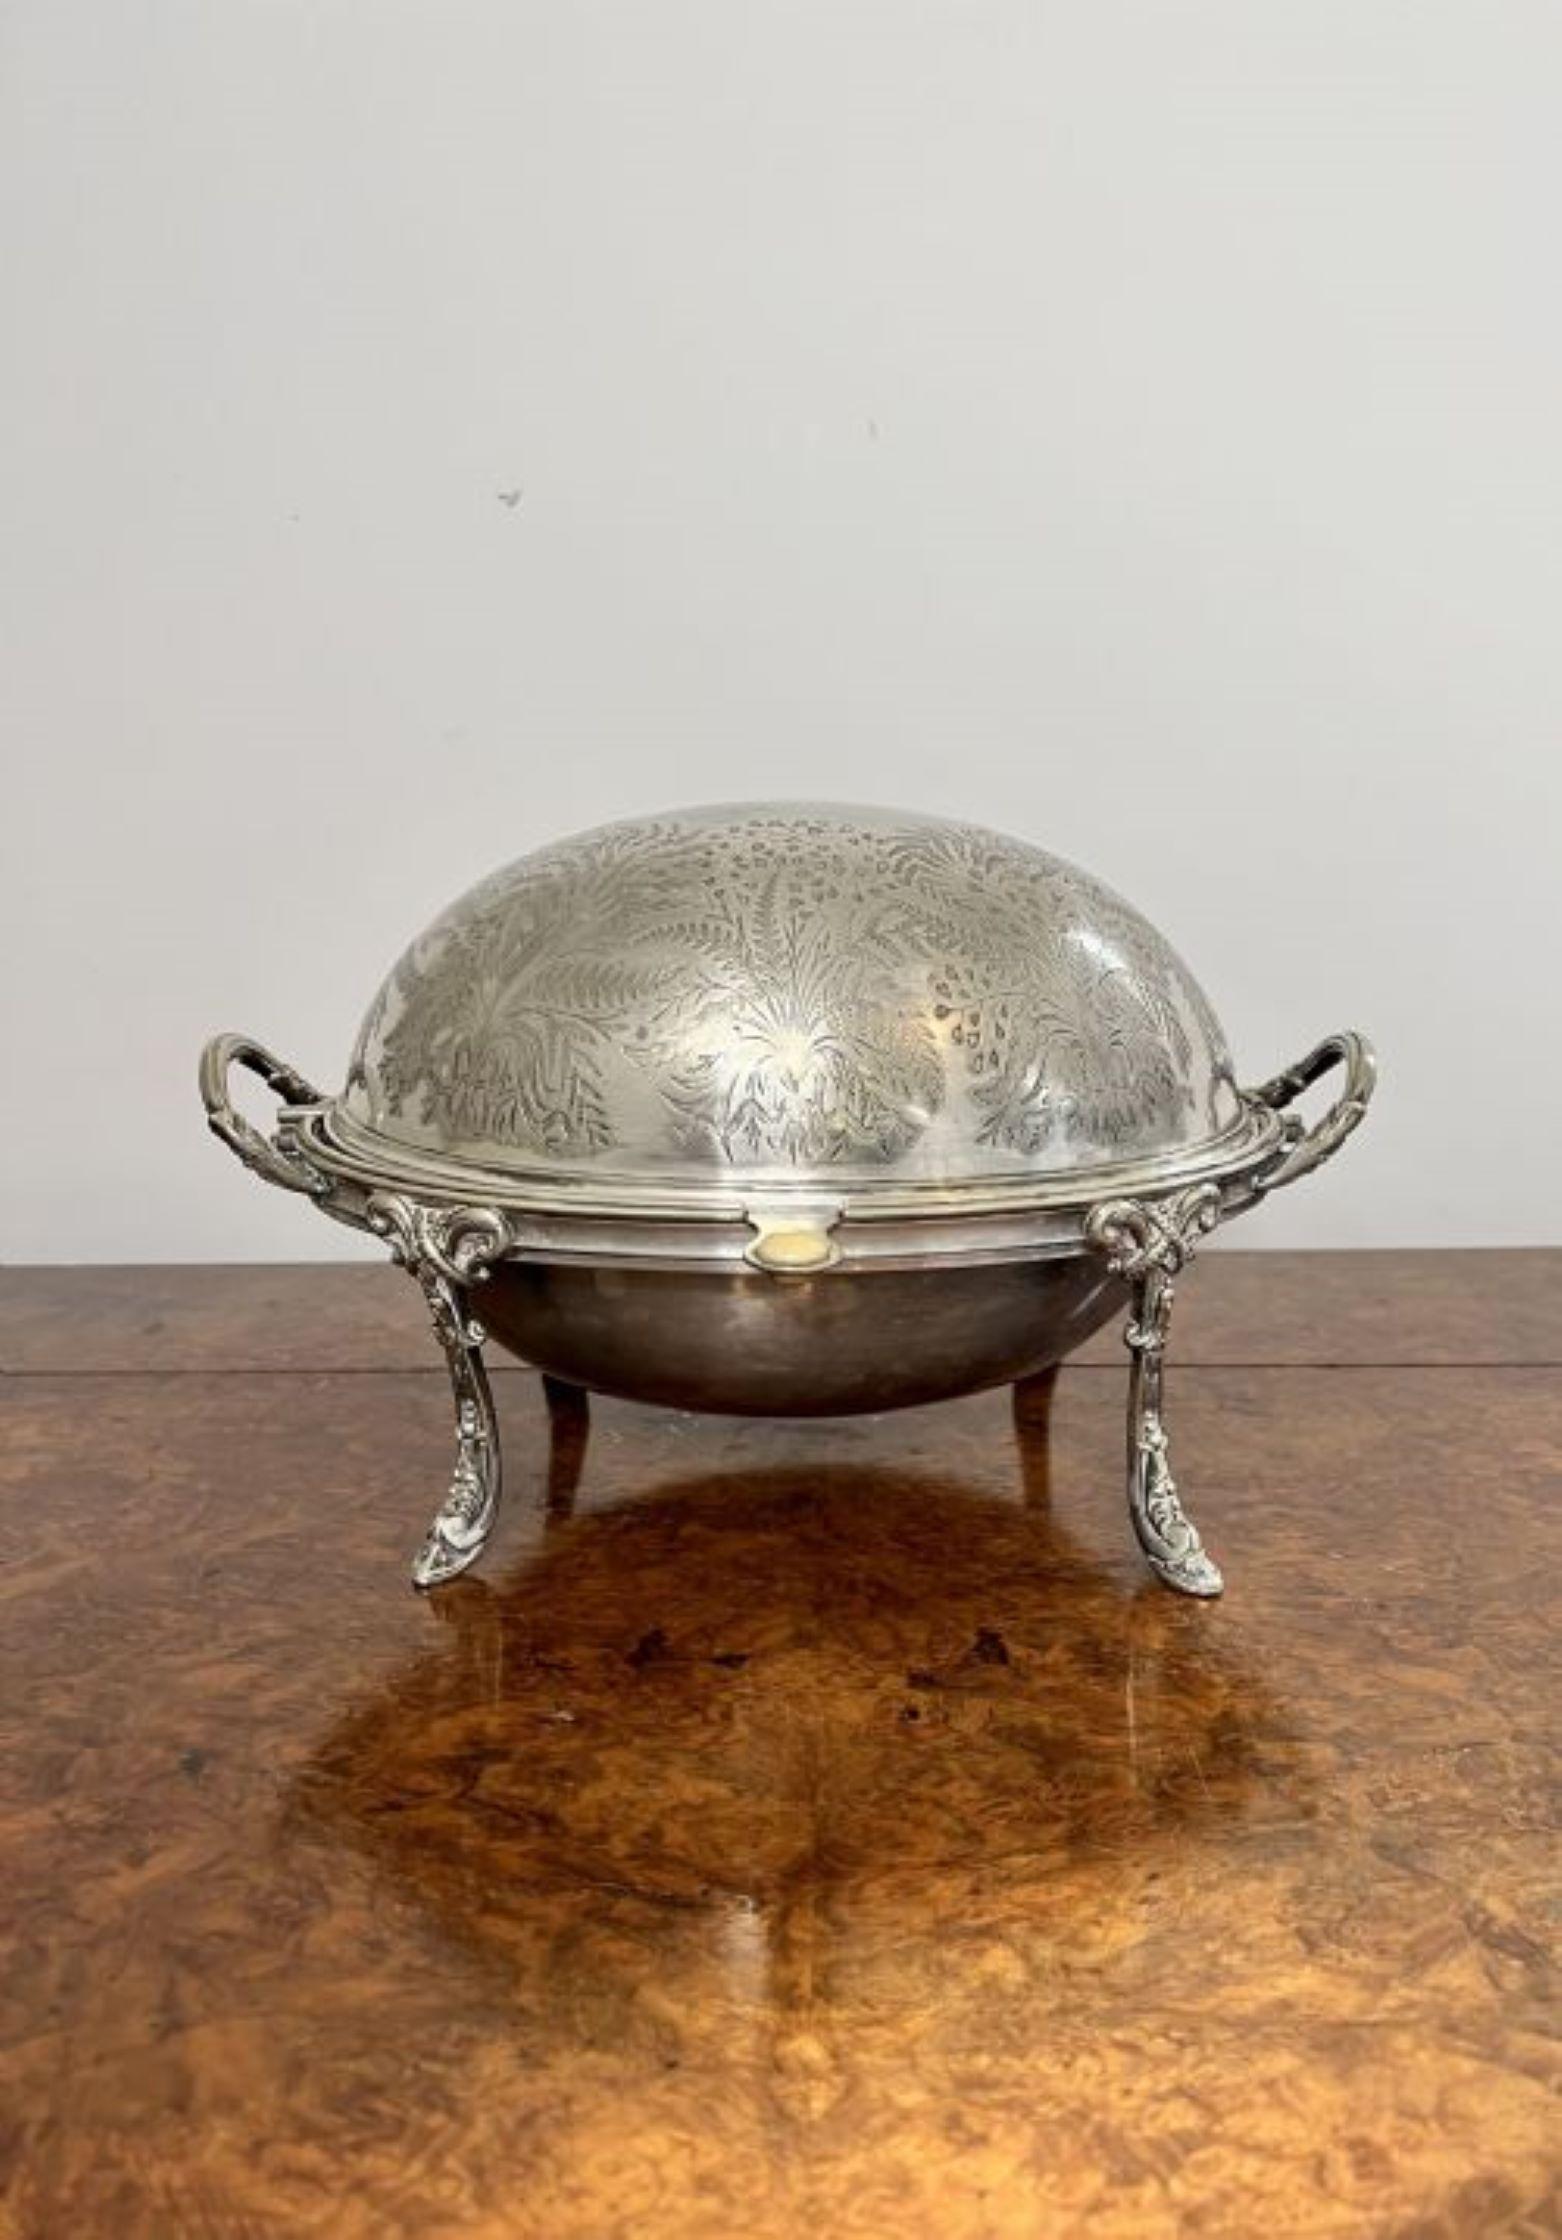 Antique Edwardian quality silver plated turnover dish having a quality silver plated turnover dish with a removable inside, two carrying handles standing on elegant ornate legs.
